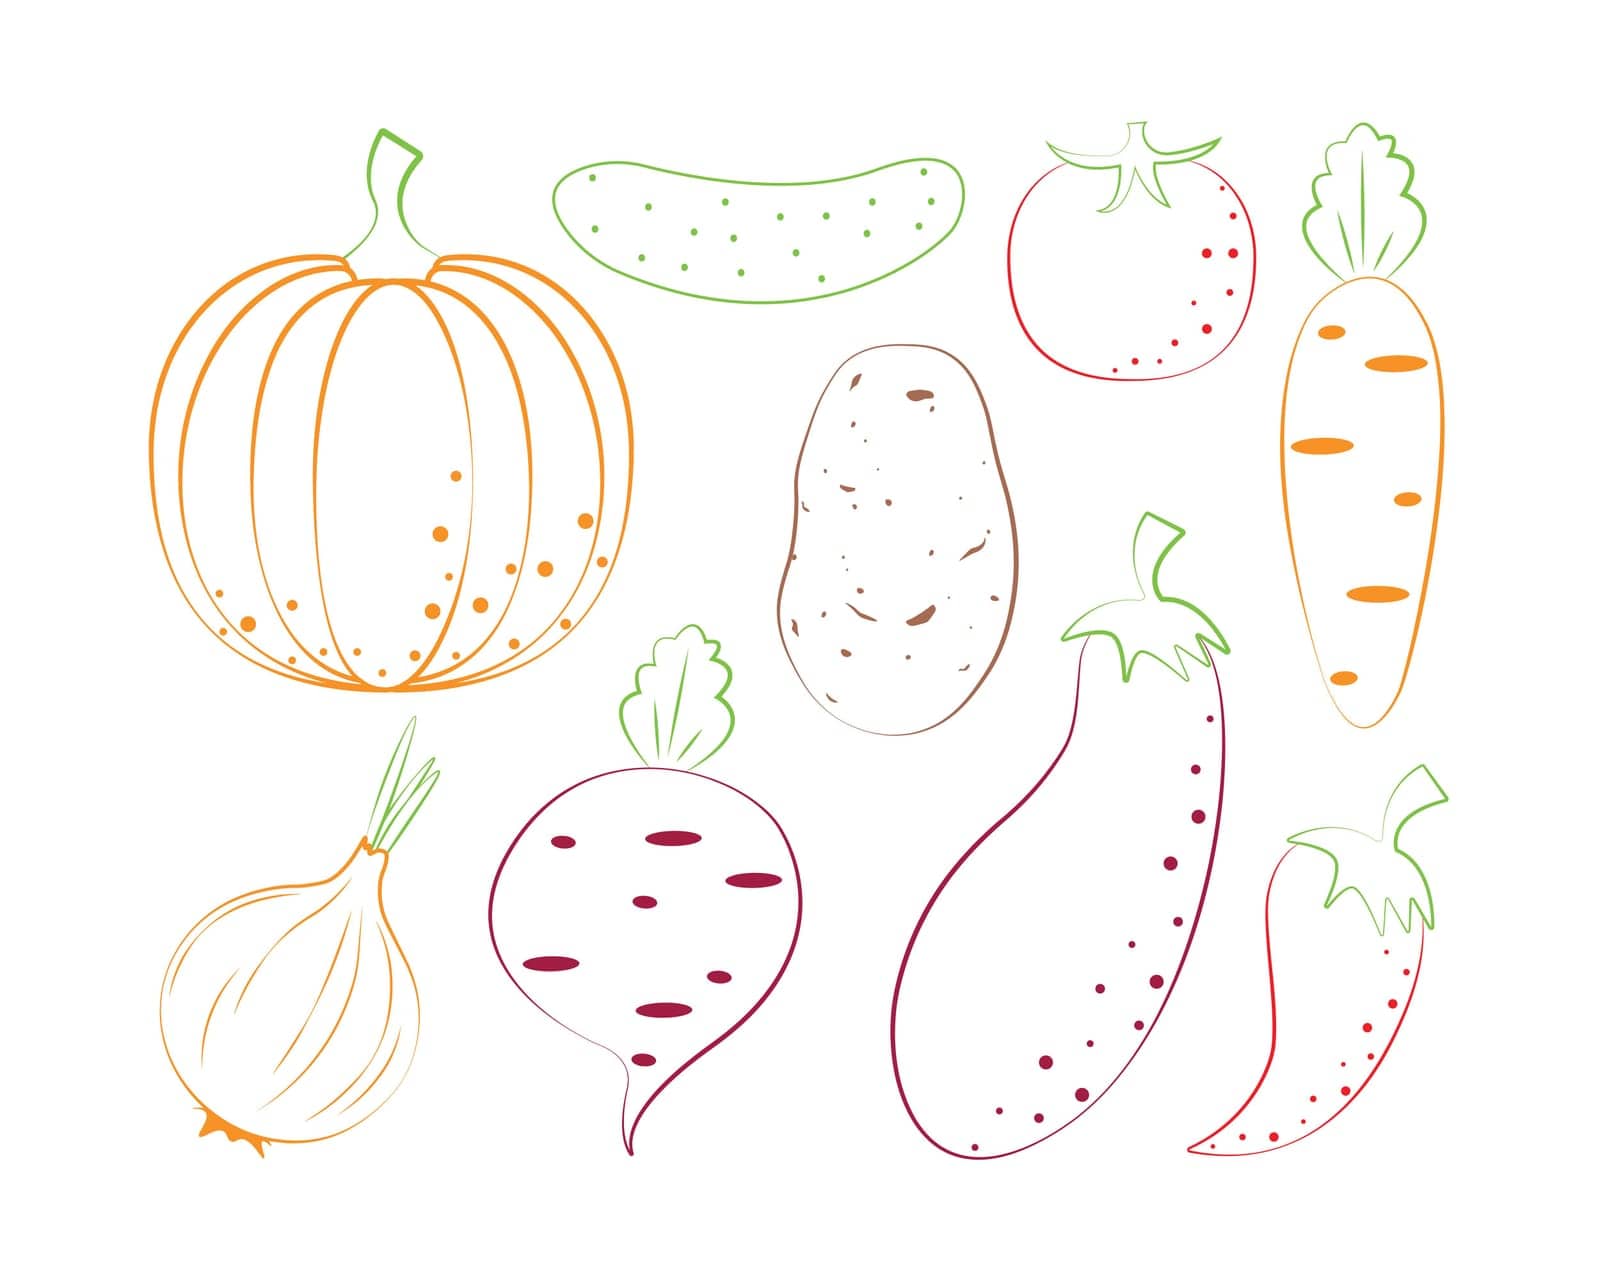 Vegetables coloring book. A children s coloring book featuring fruits such as pumpkin, carrots, peppers and beets, as well as cucumber, onion, tomato and potatoes with eggplant. Garden vegetables. by NastyaN